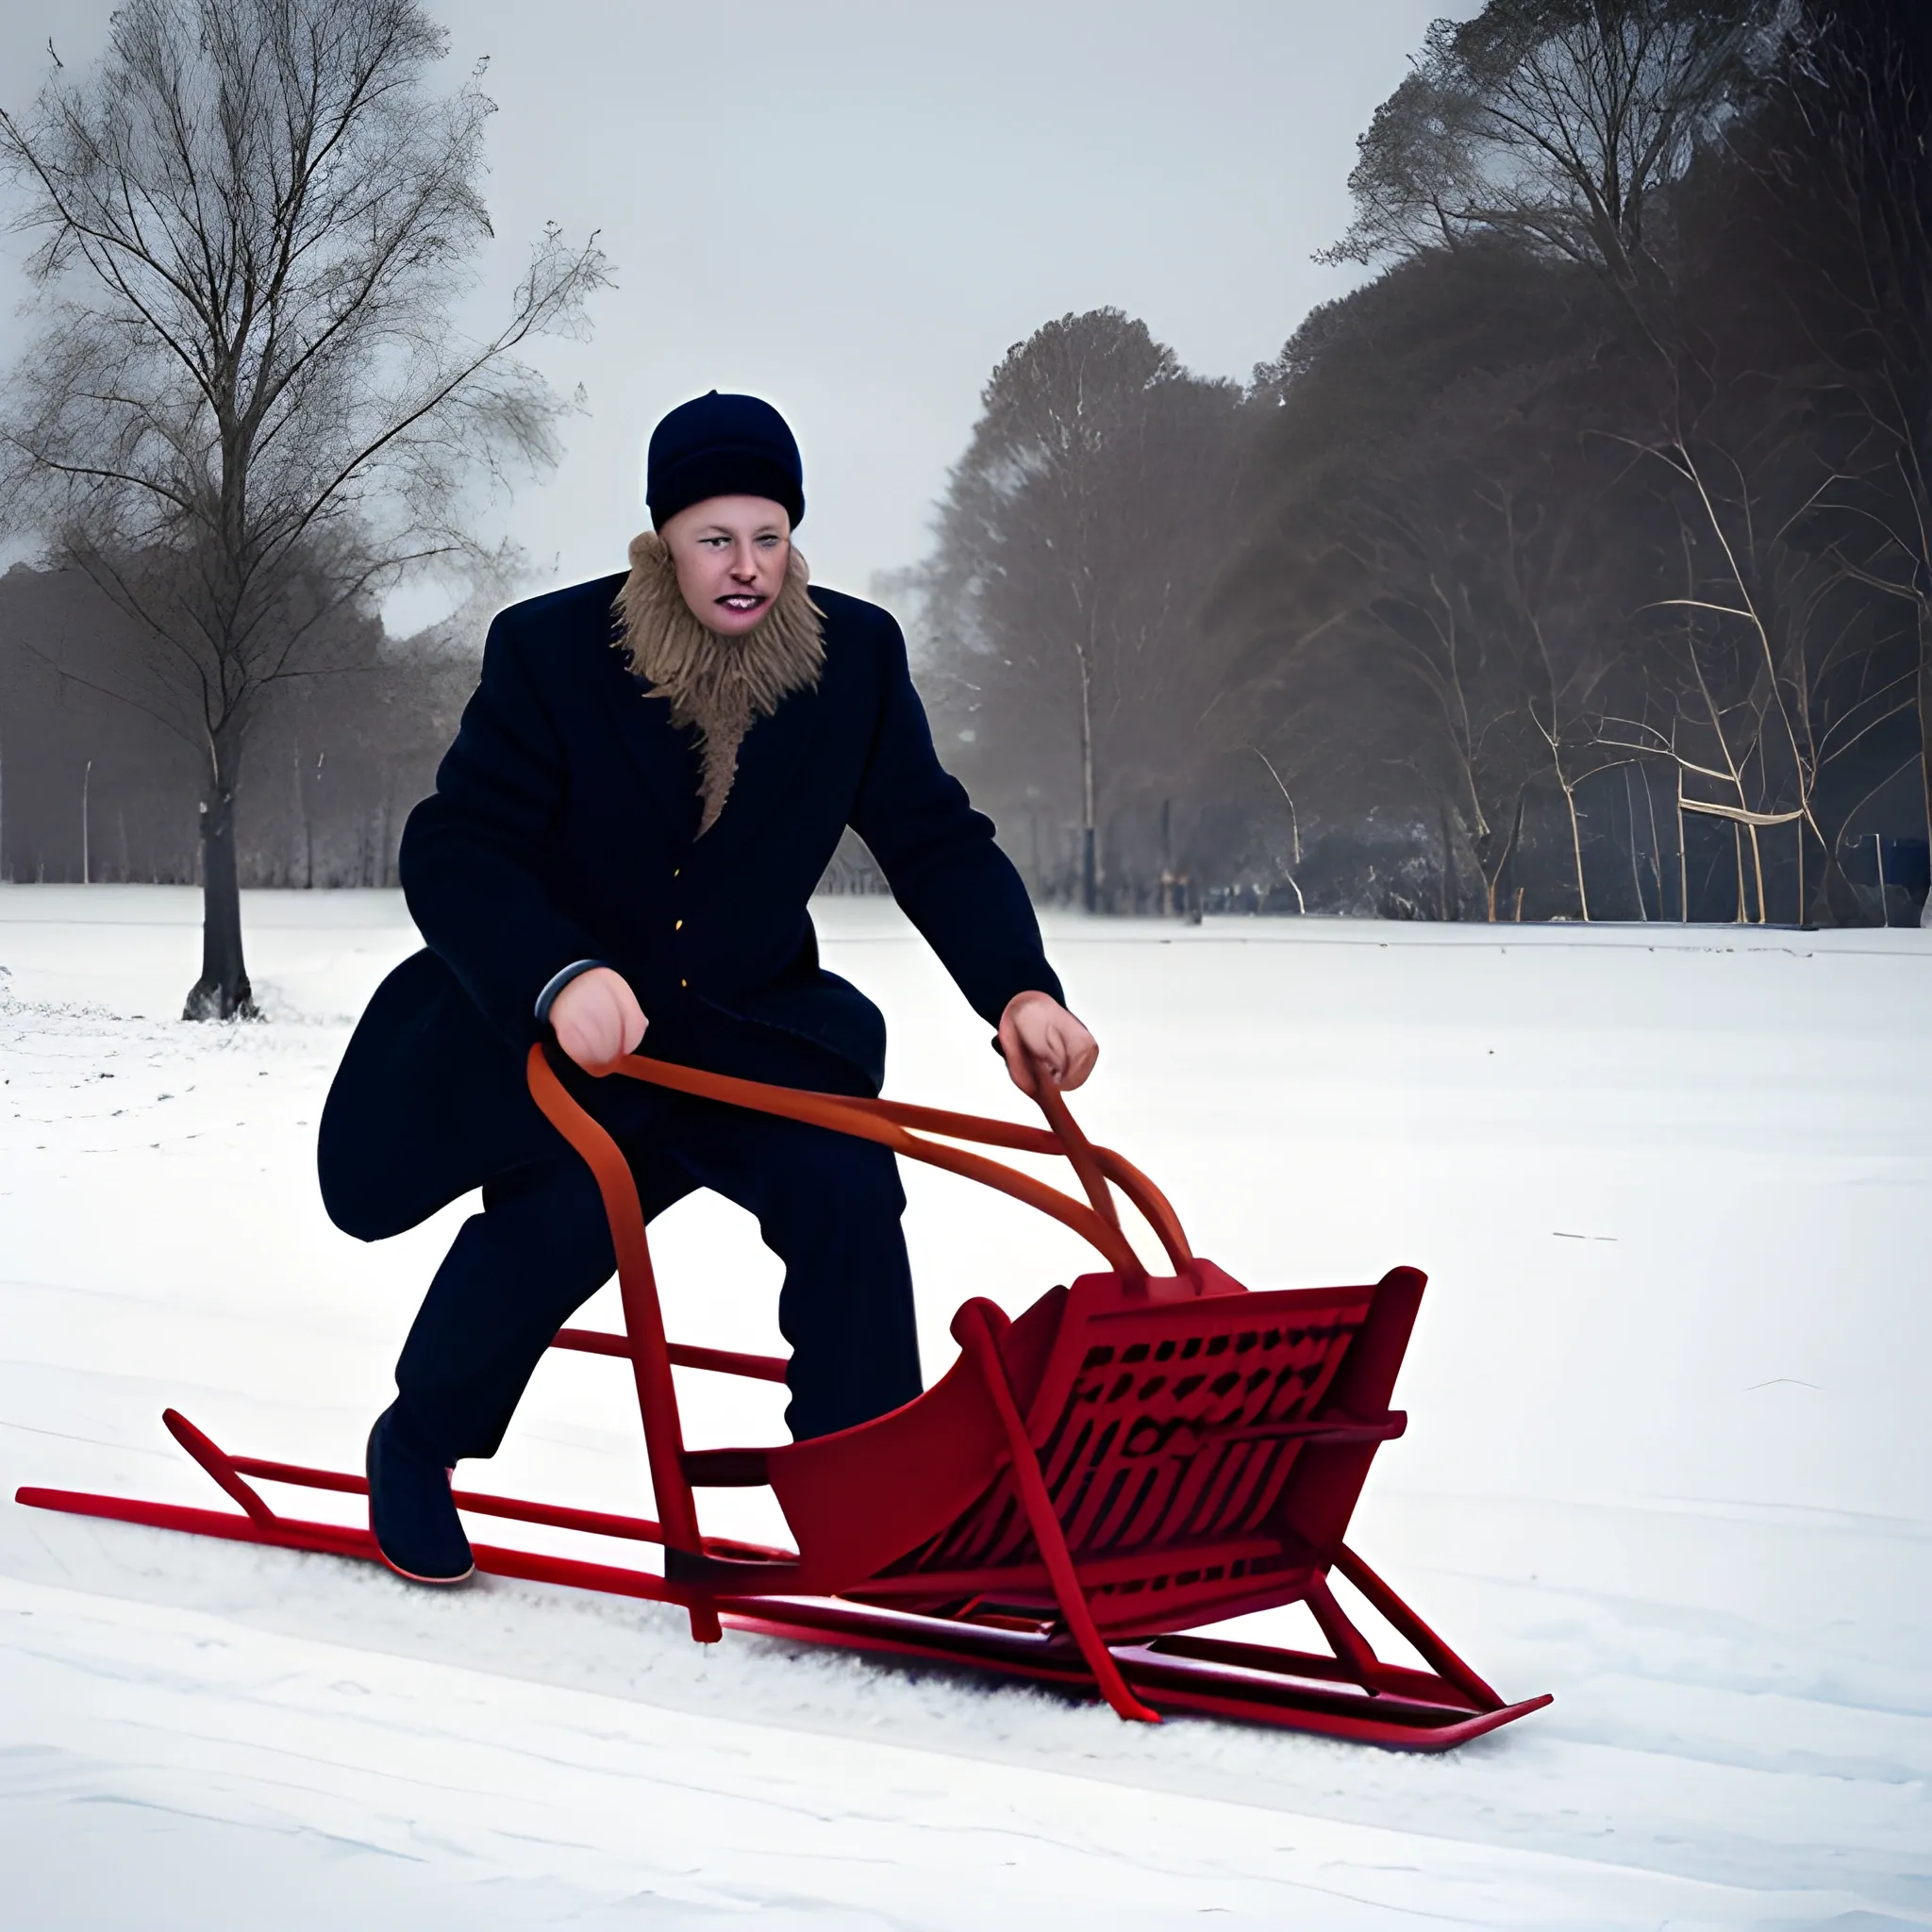  man on a sledge, concentrated